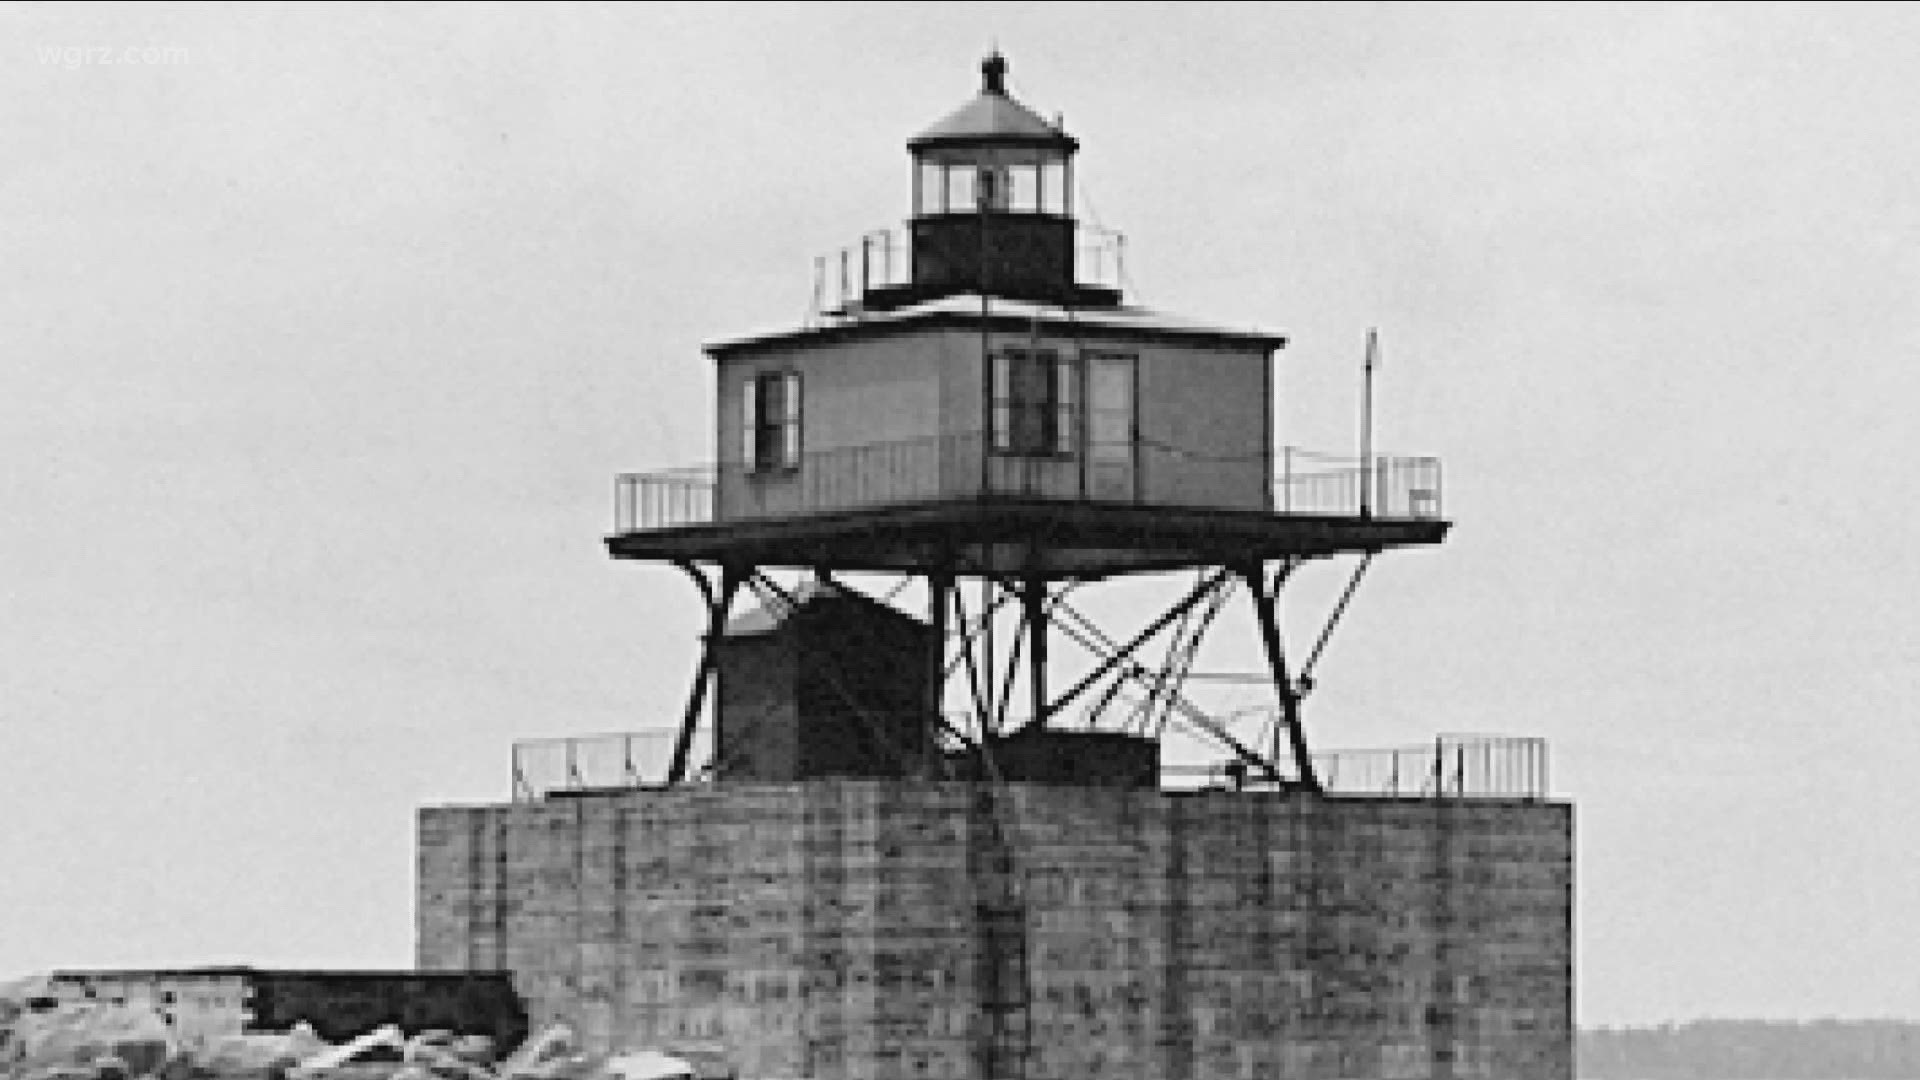 Unknown Stories: Buffalo's lighthouse